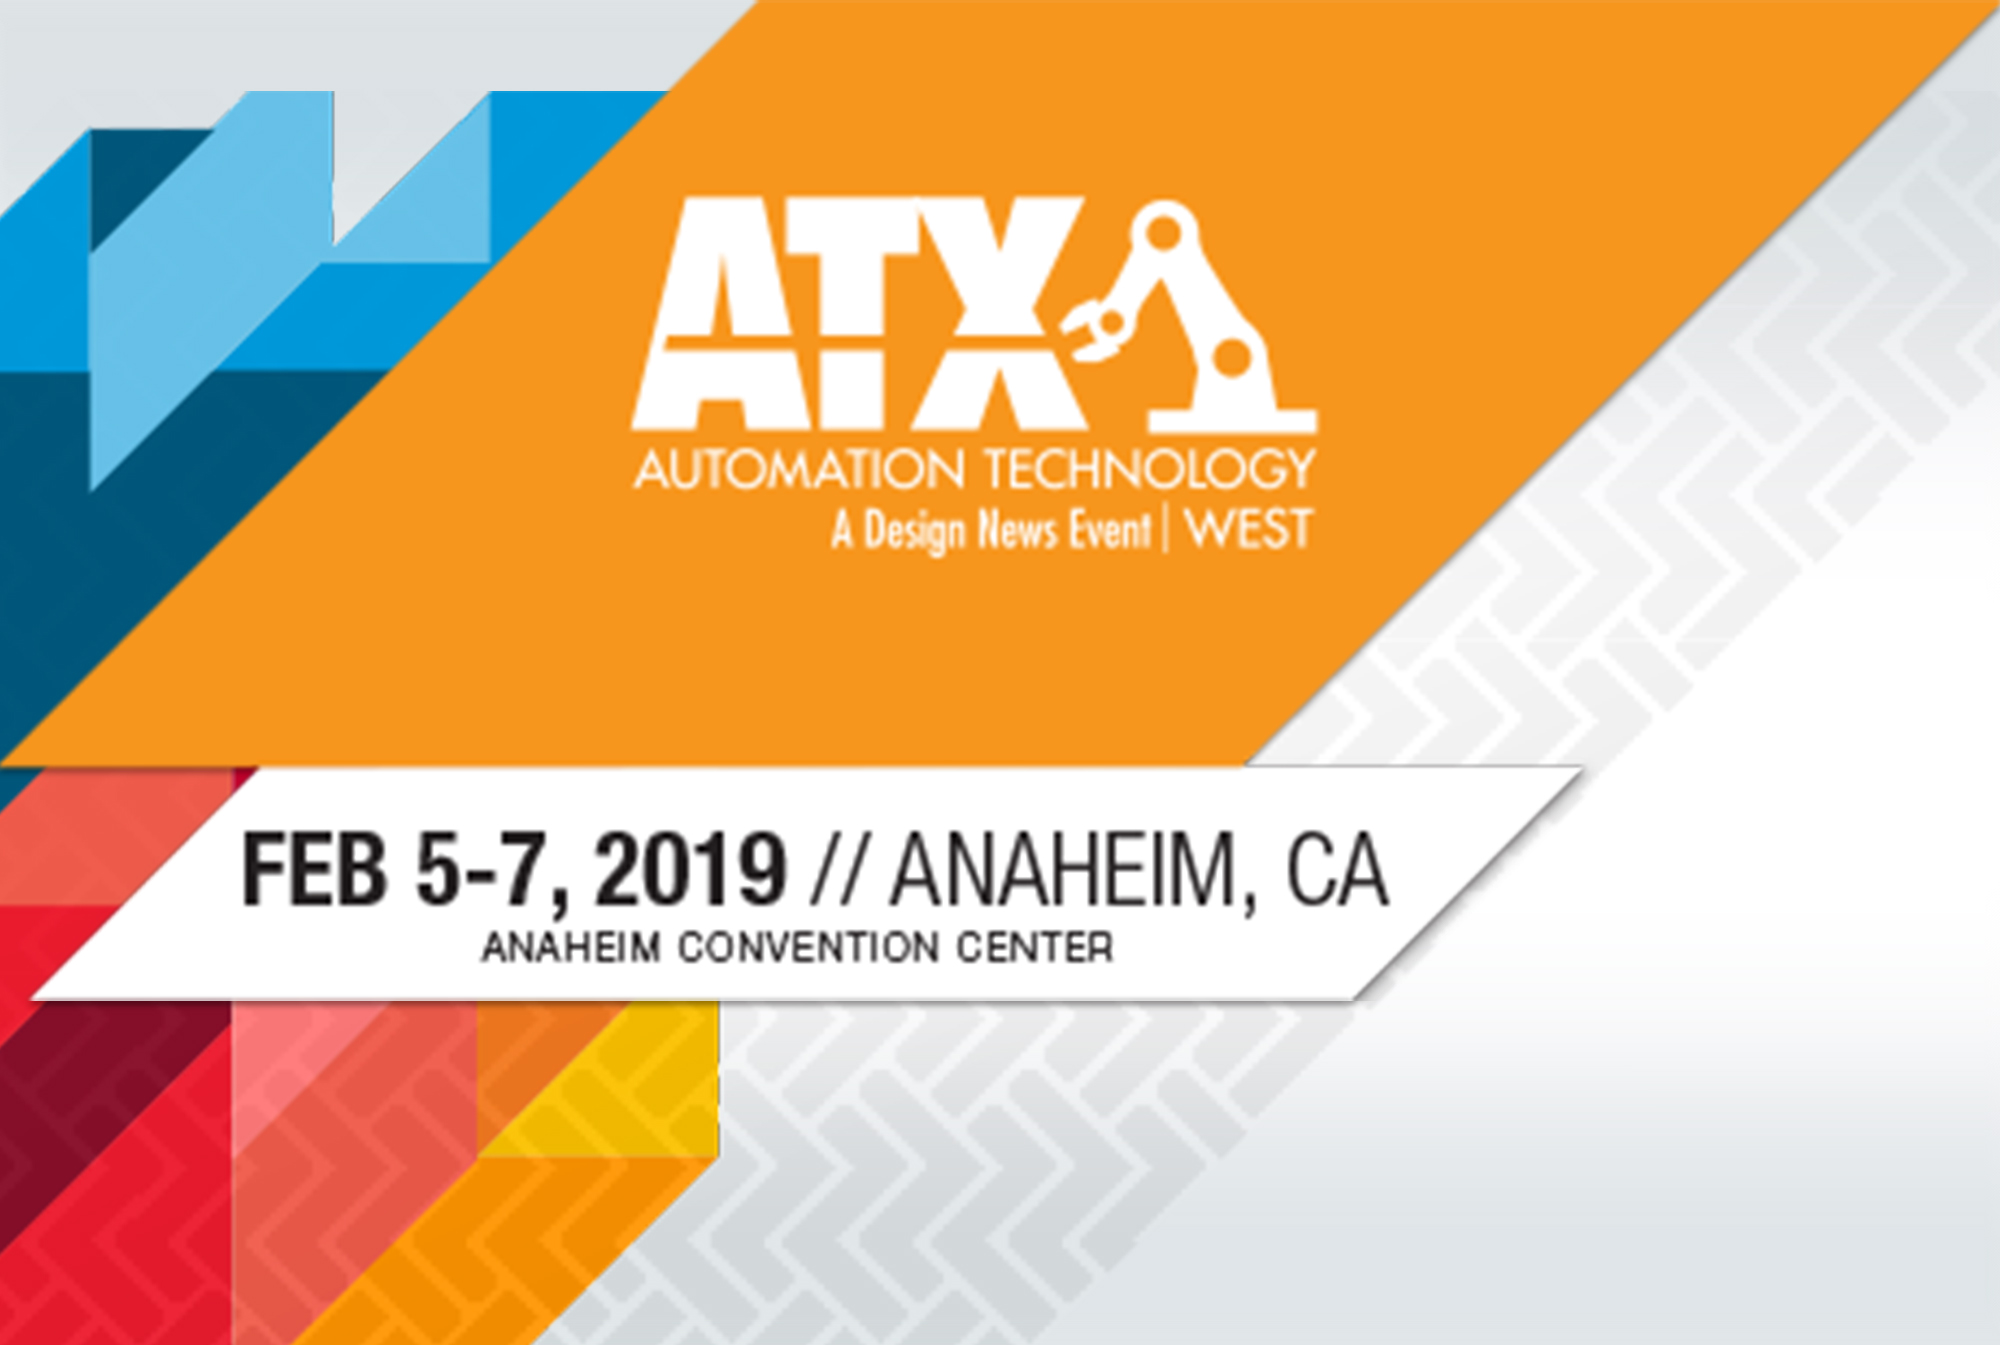 Find us at booth #4171, Hall B in ATX West, 2019!